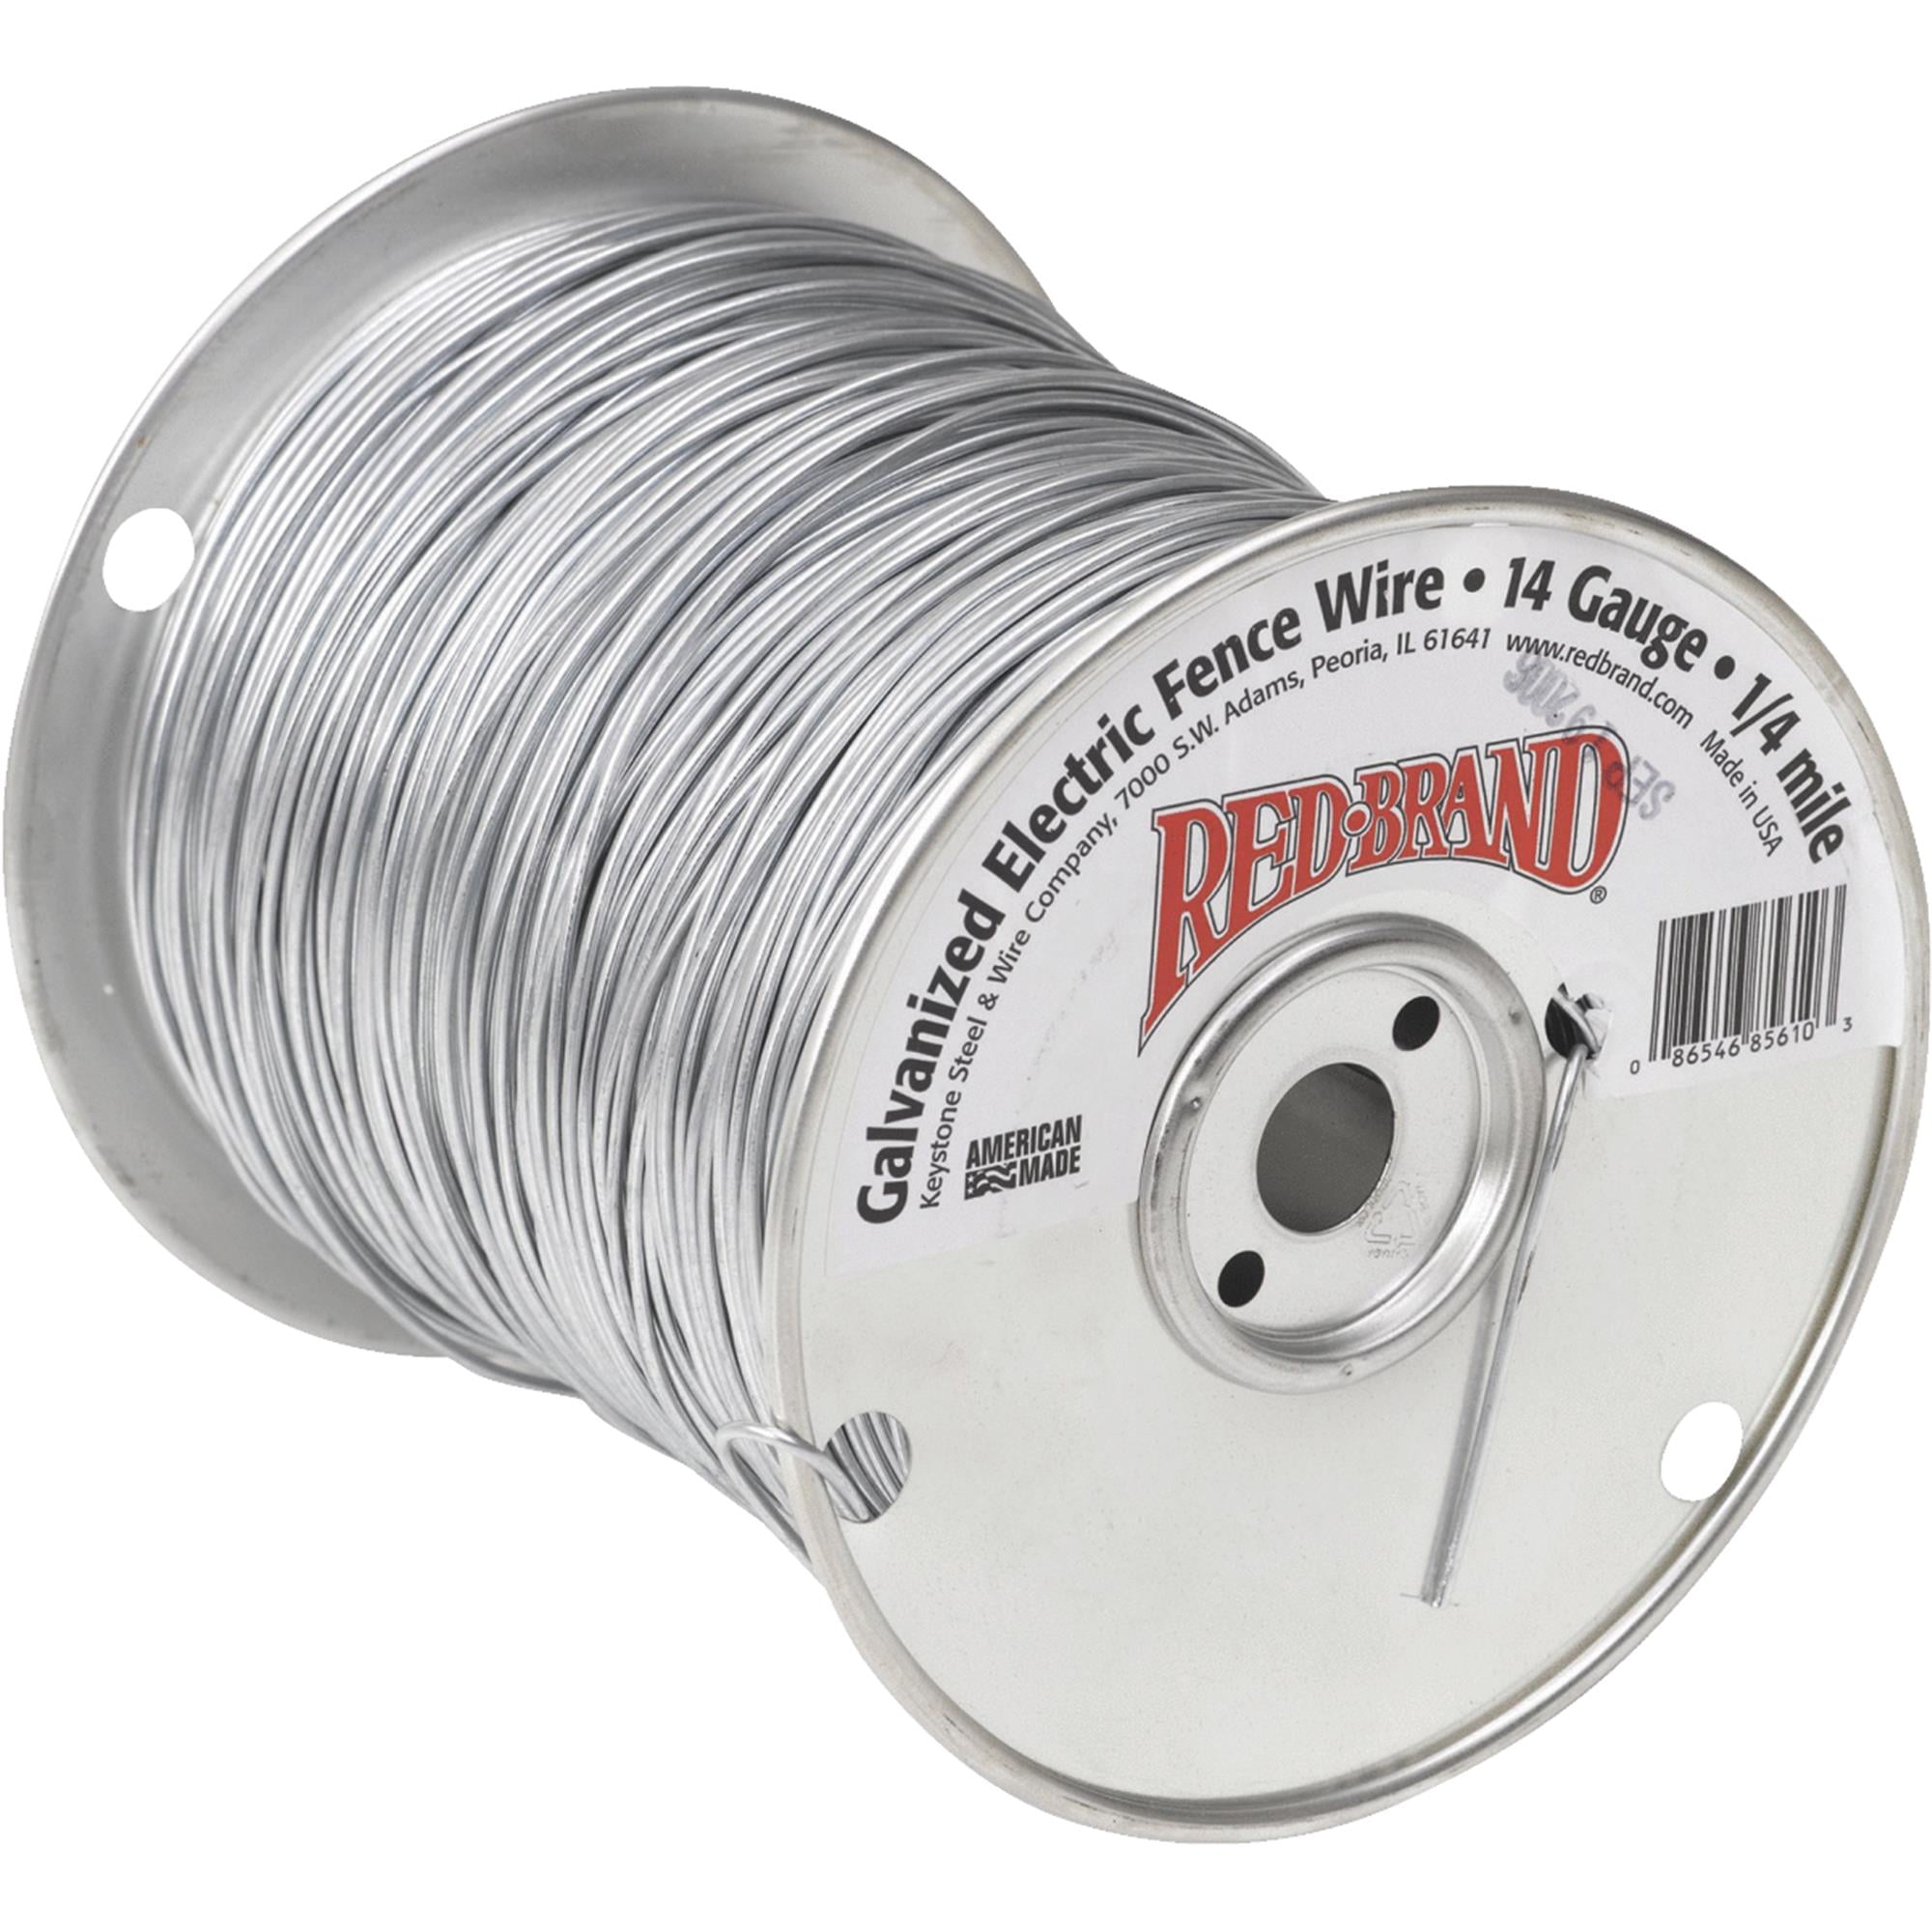 Electric Fence Wire Gallagher Xl Aluminum Wire 17 Length 1350u0027